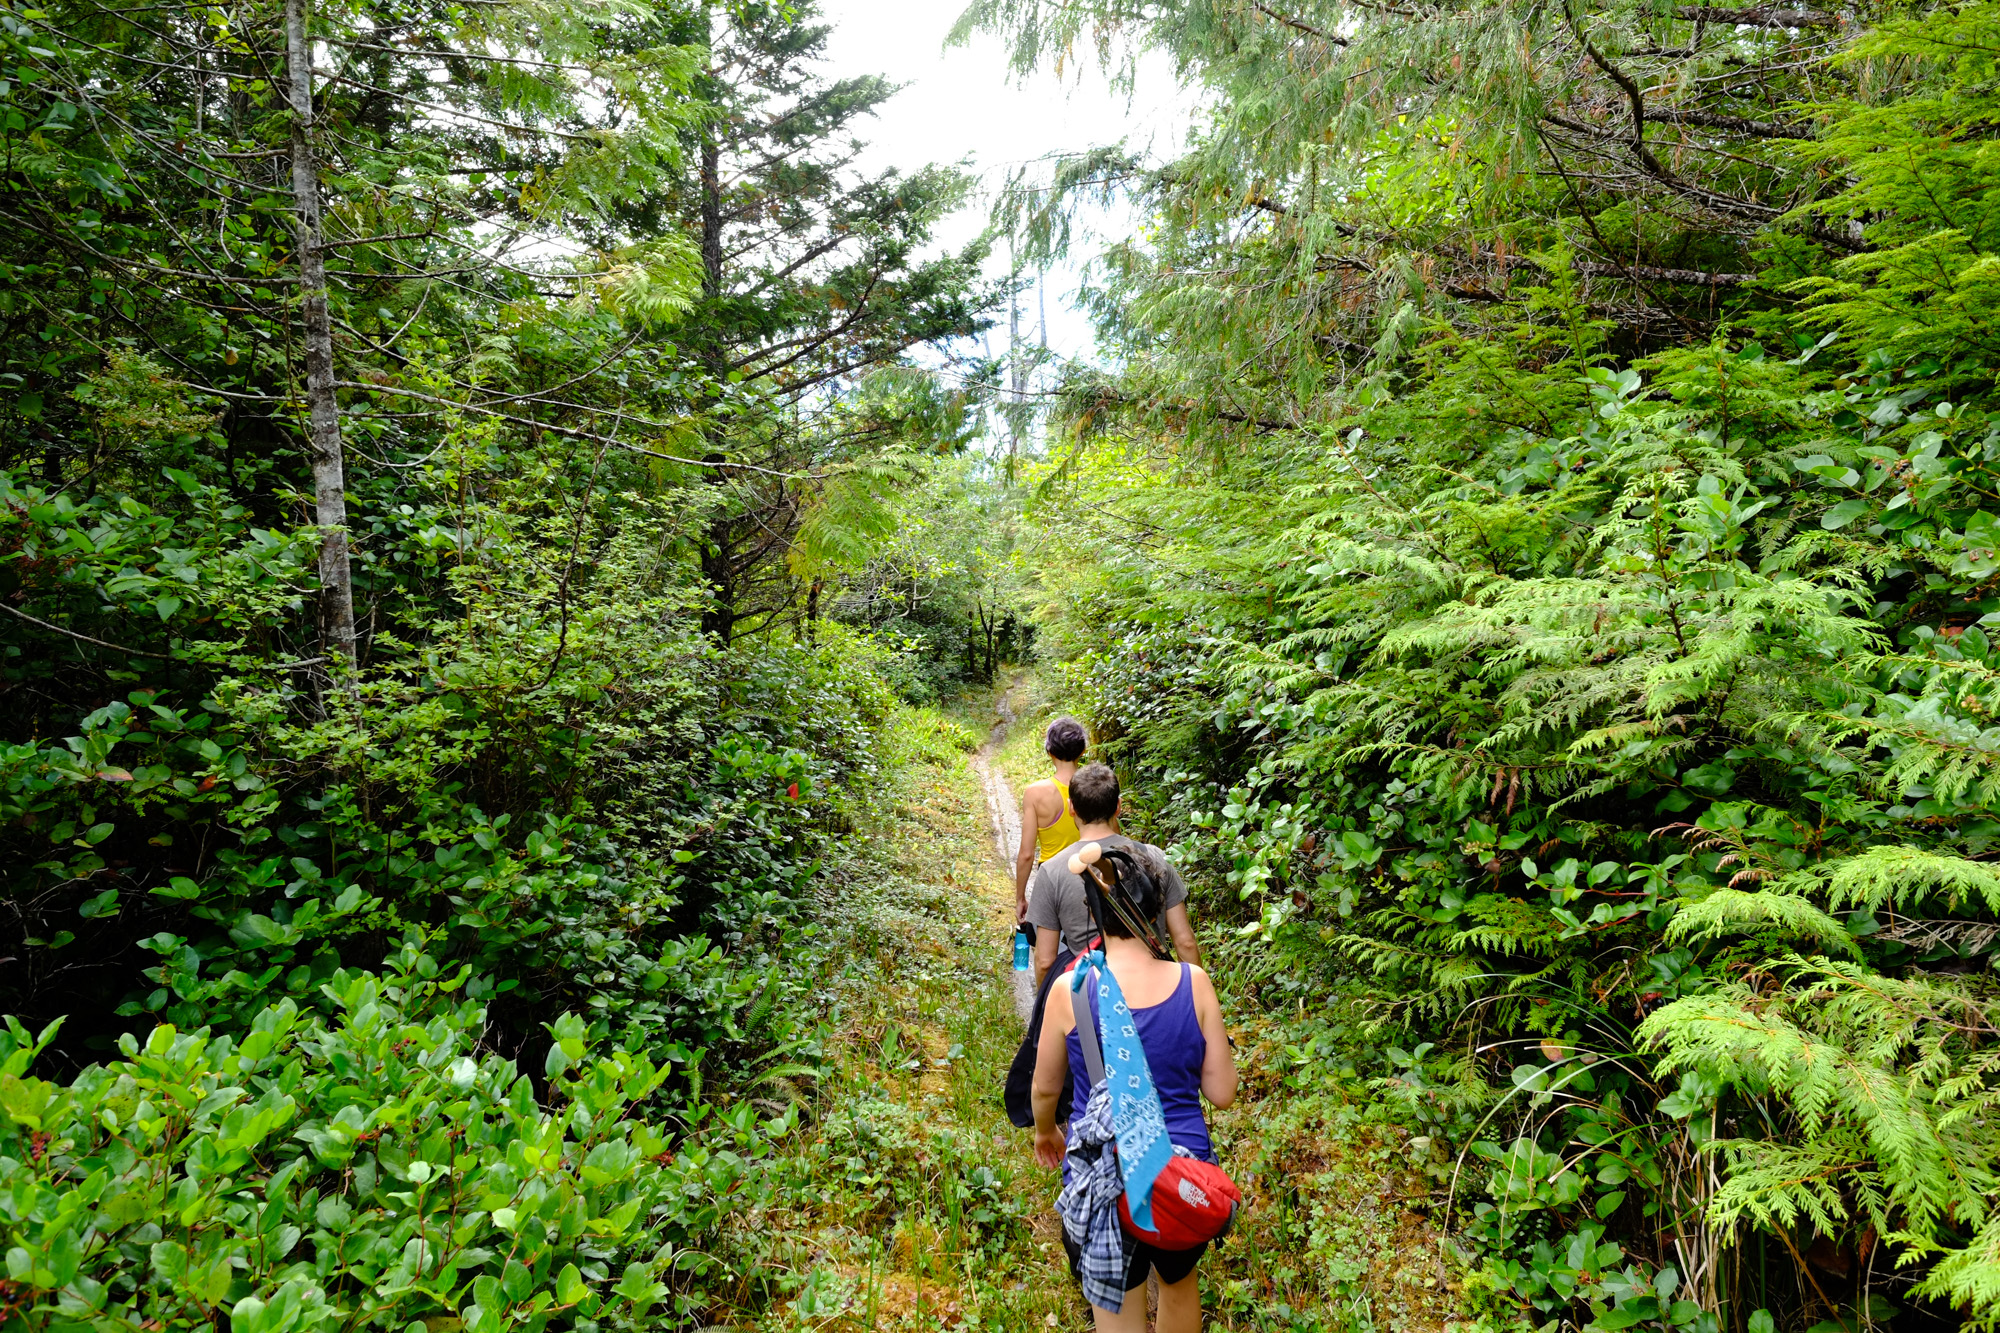 Hikers along a lush forest trail in BC.